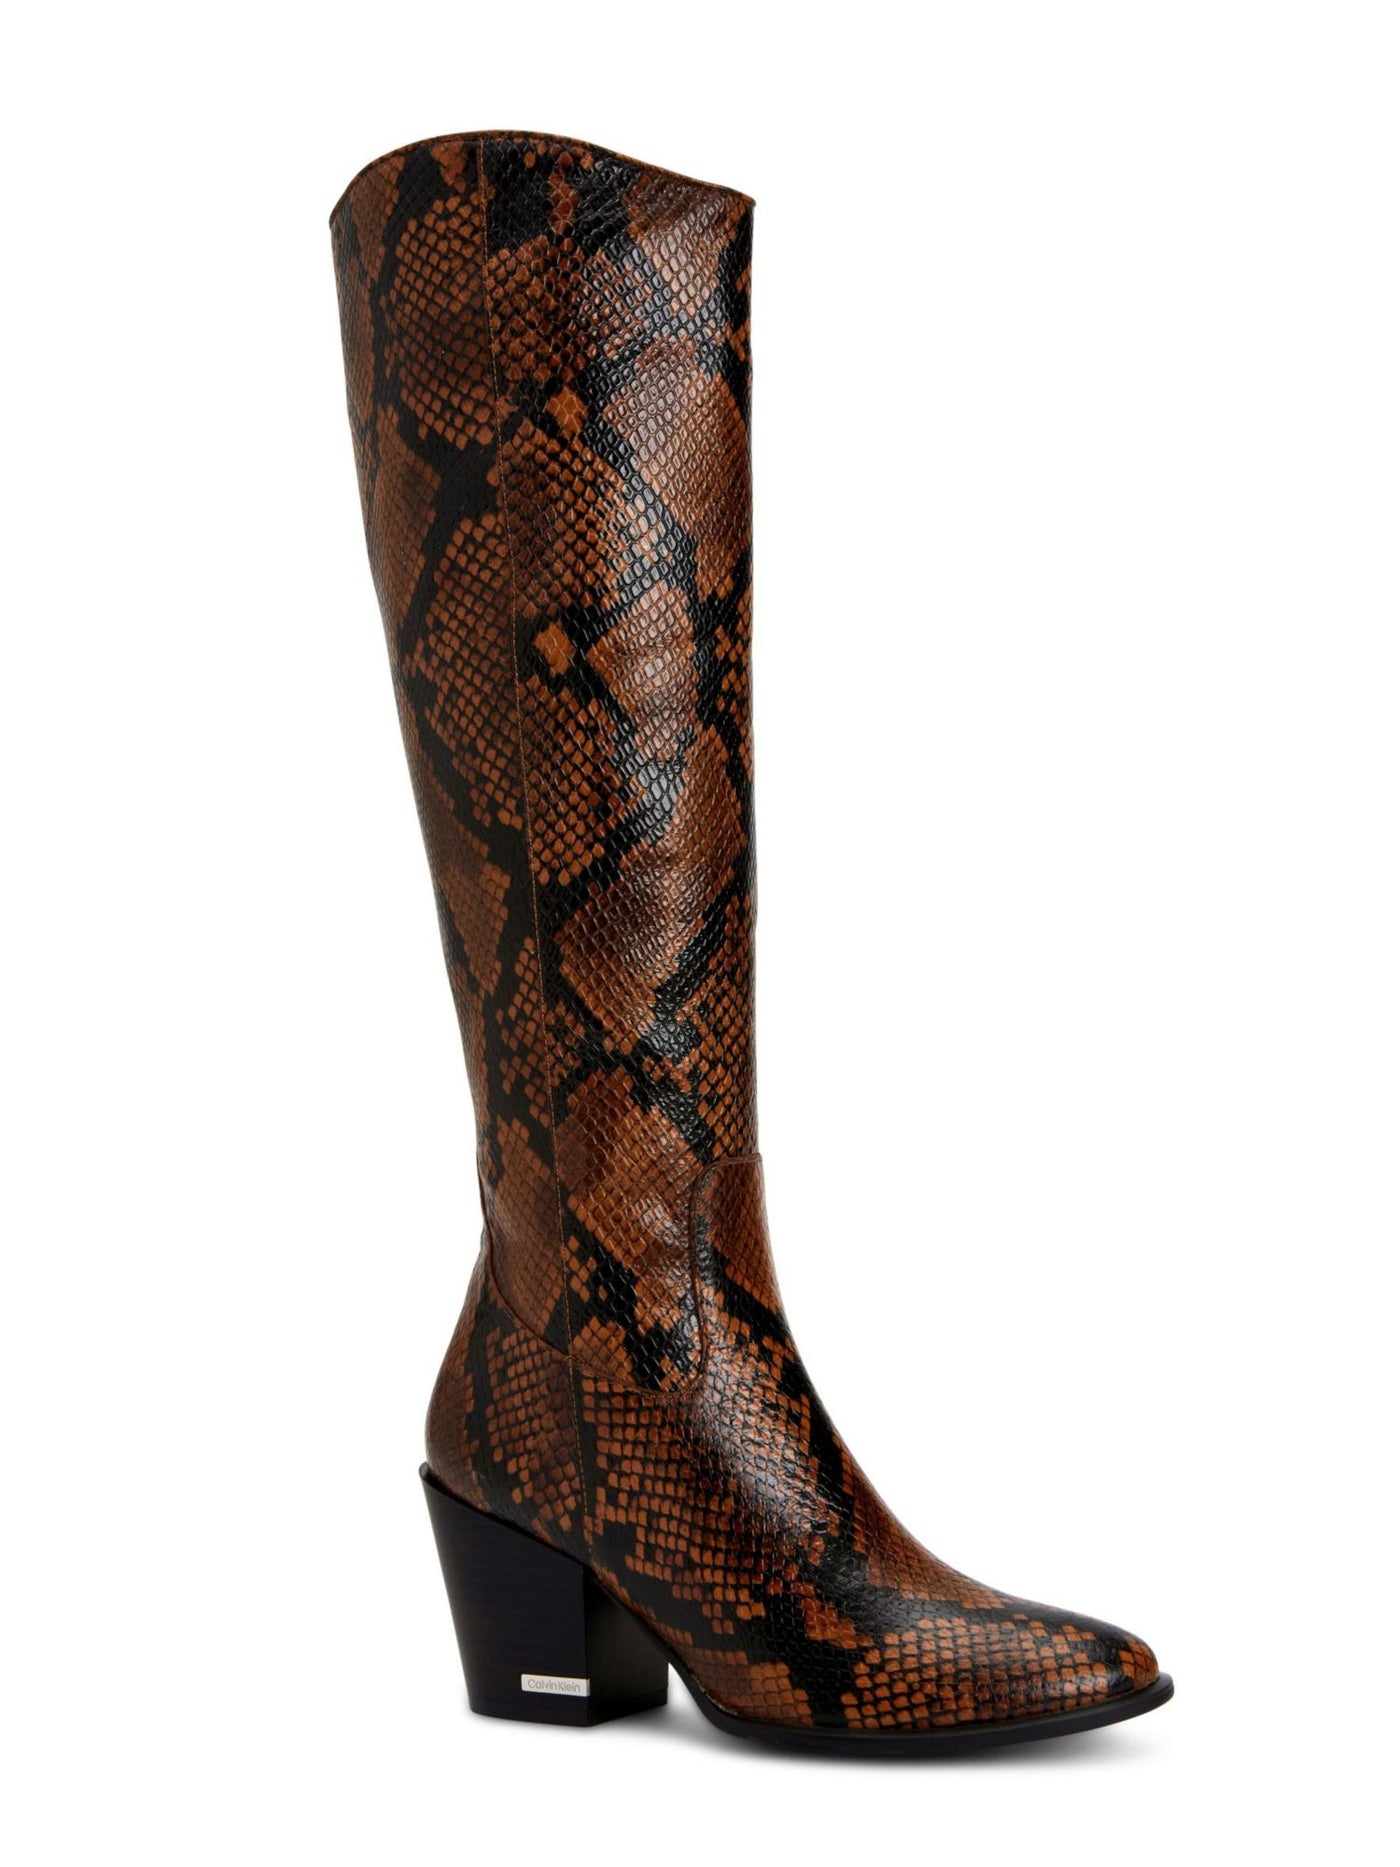 CALVIN KLEIN Womens Brown Animal Print Almond Toe Stacked Heel Zip-Up Leather Heeled Boots 6.5